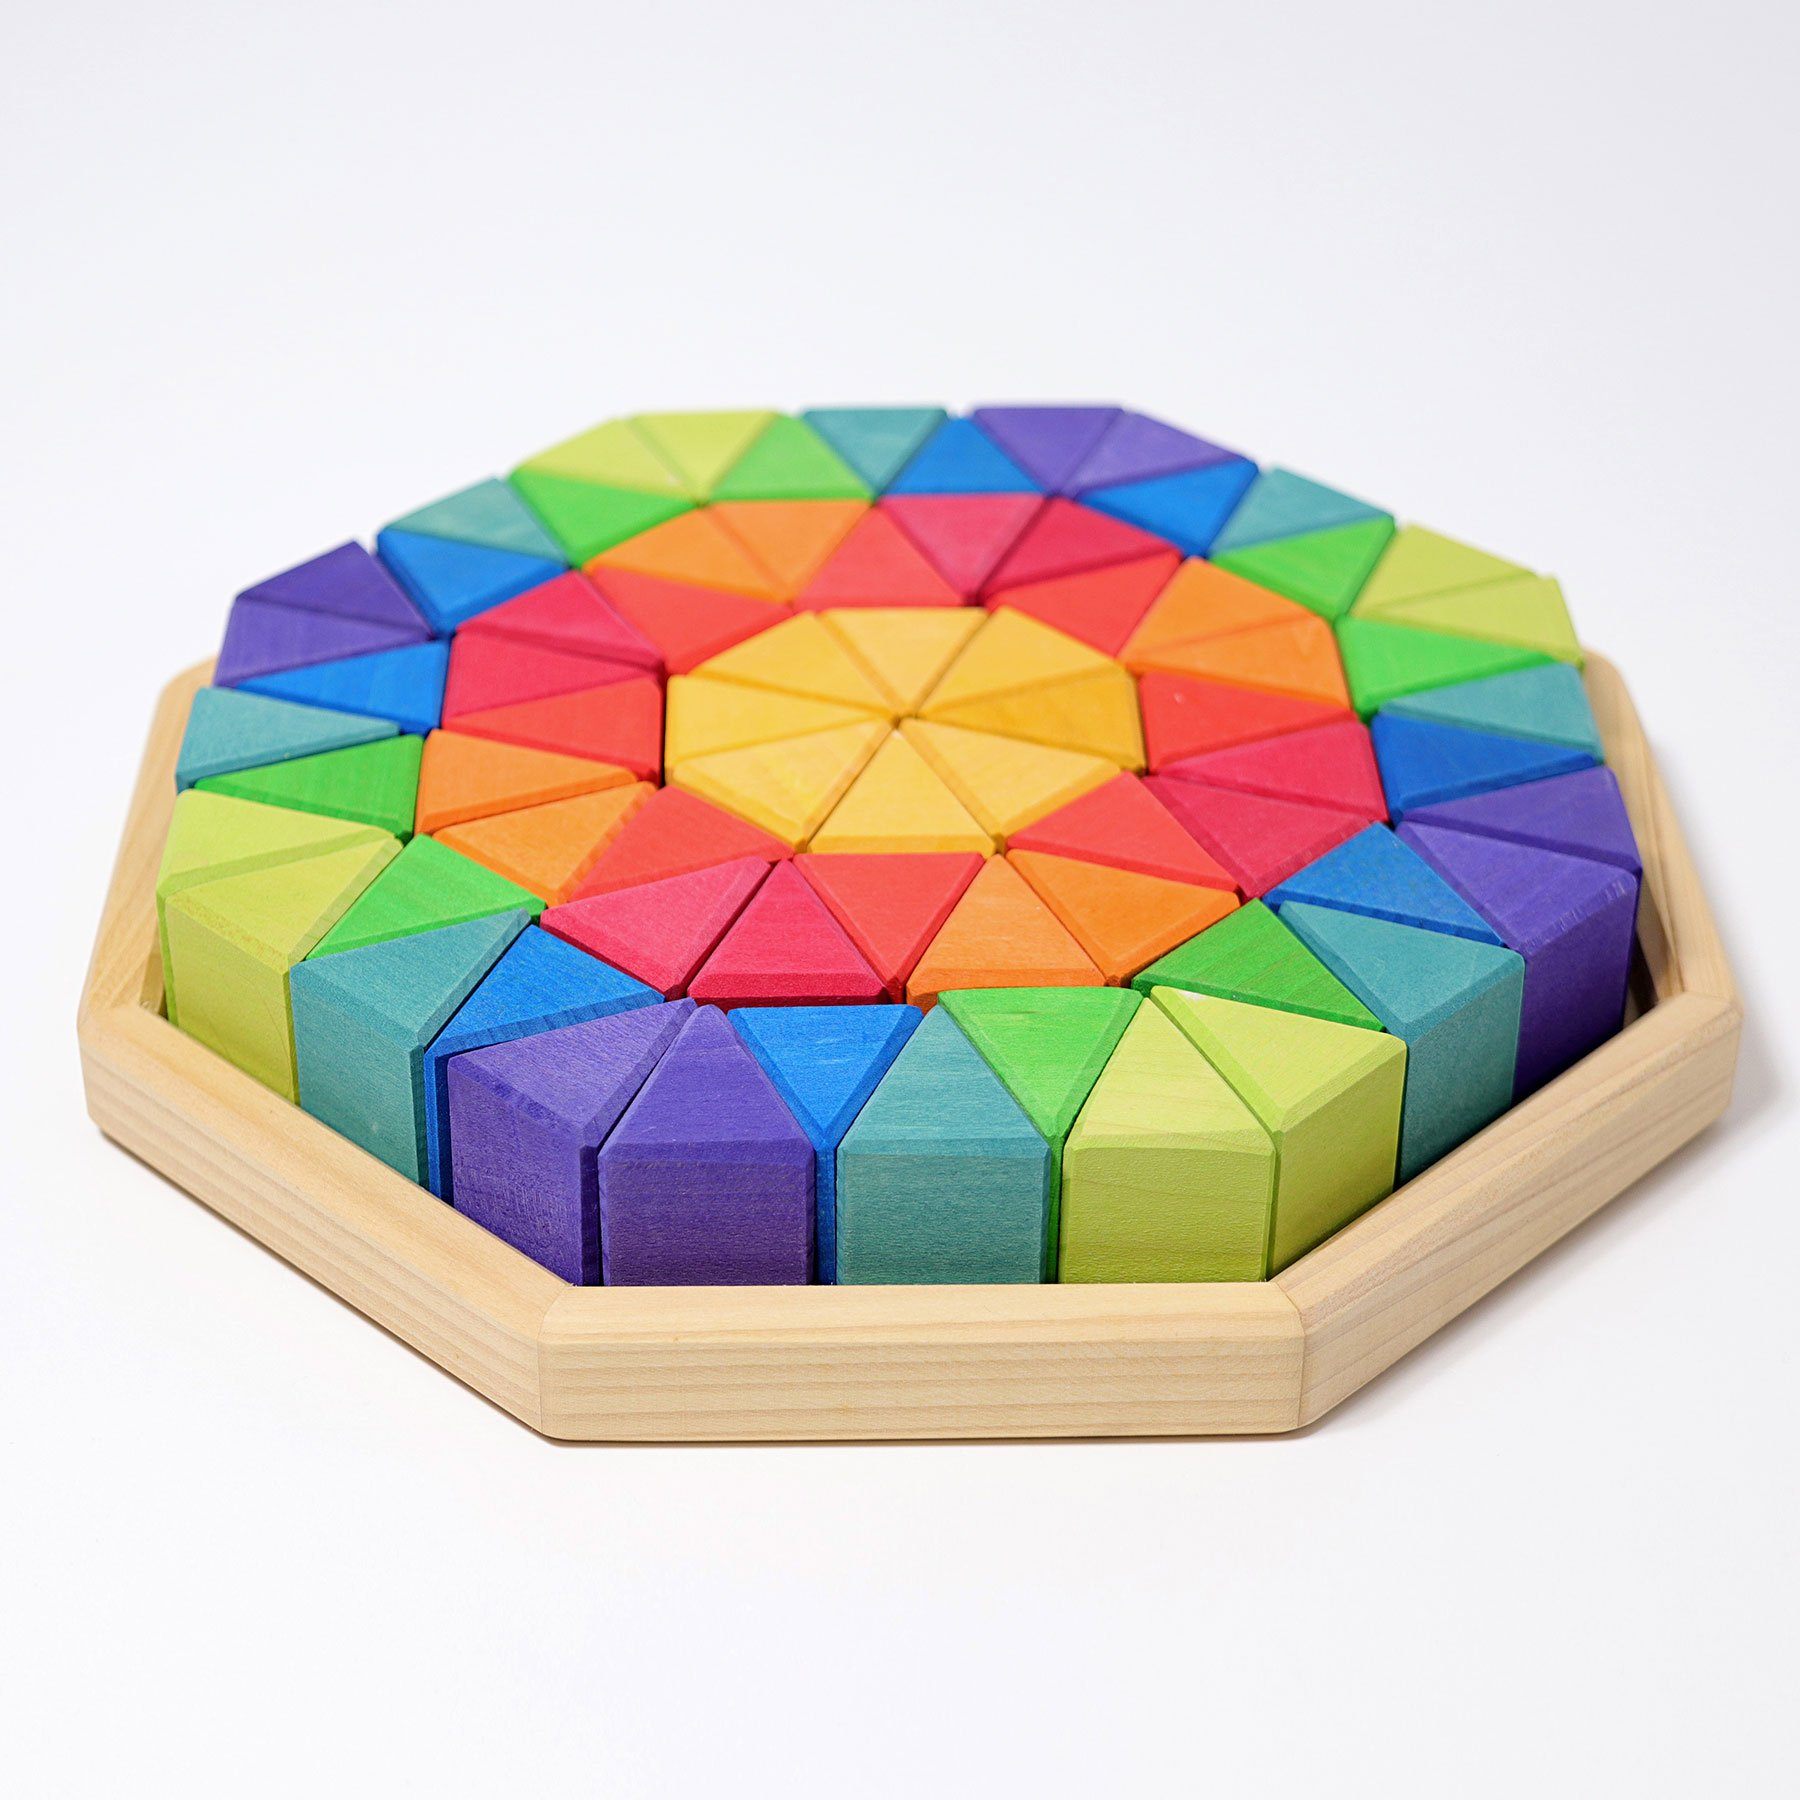 72 rainbow colored pieces in a large wooden octagon frame.